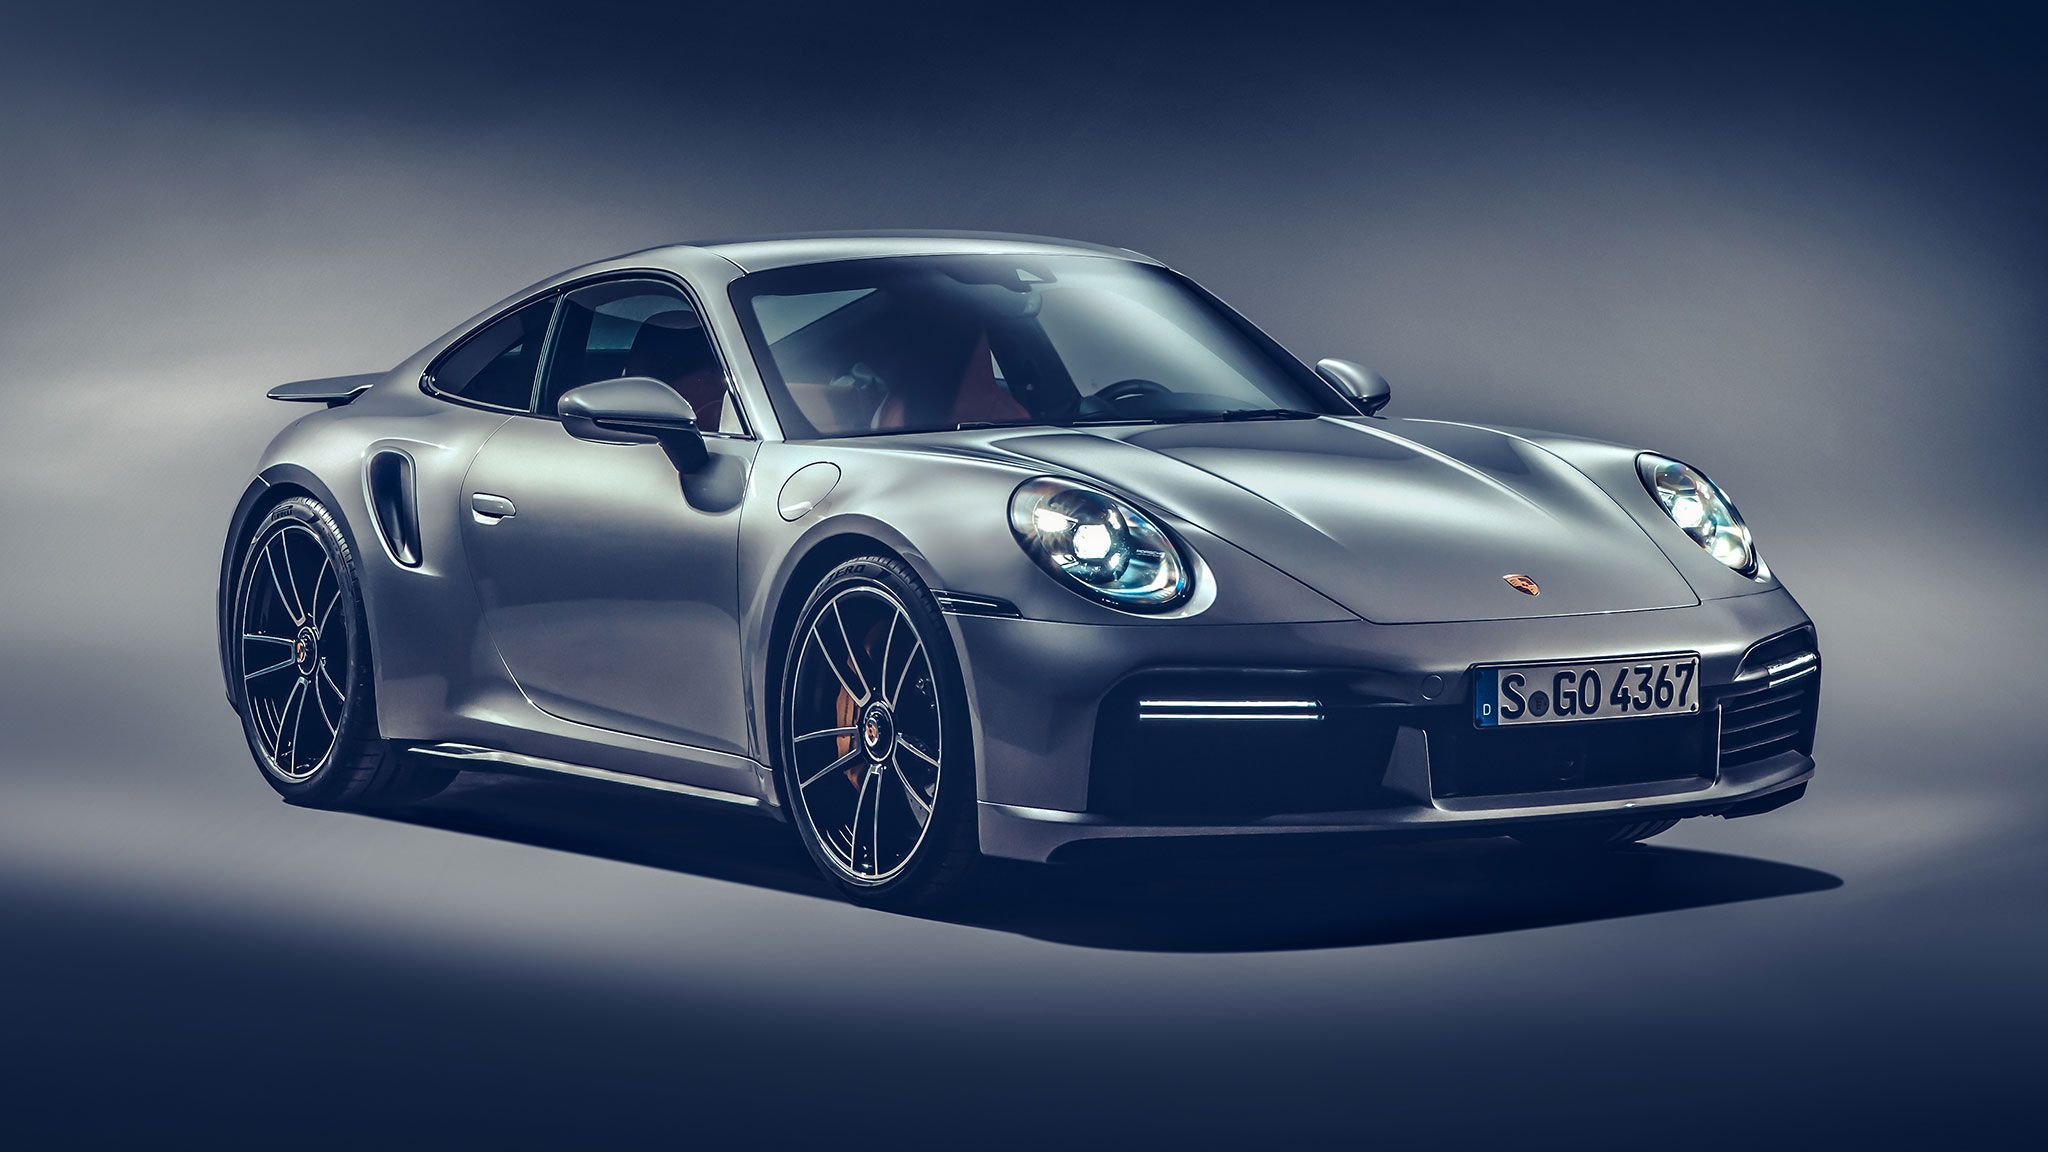 Porsche 911 Turbo S: The Most Powerful and Quickest Yet